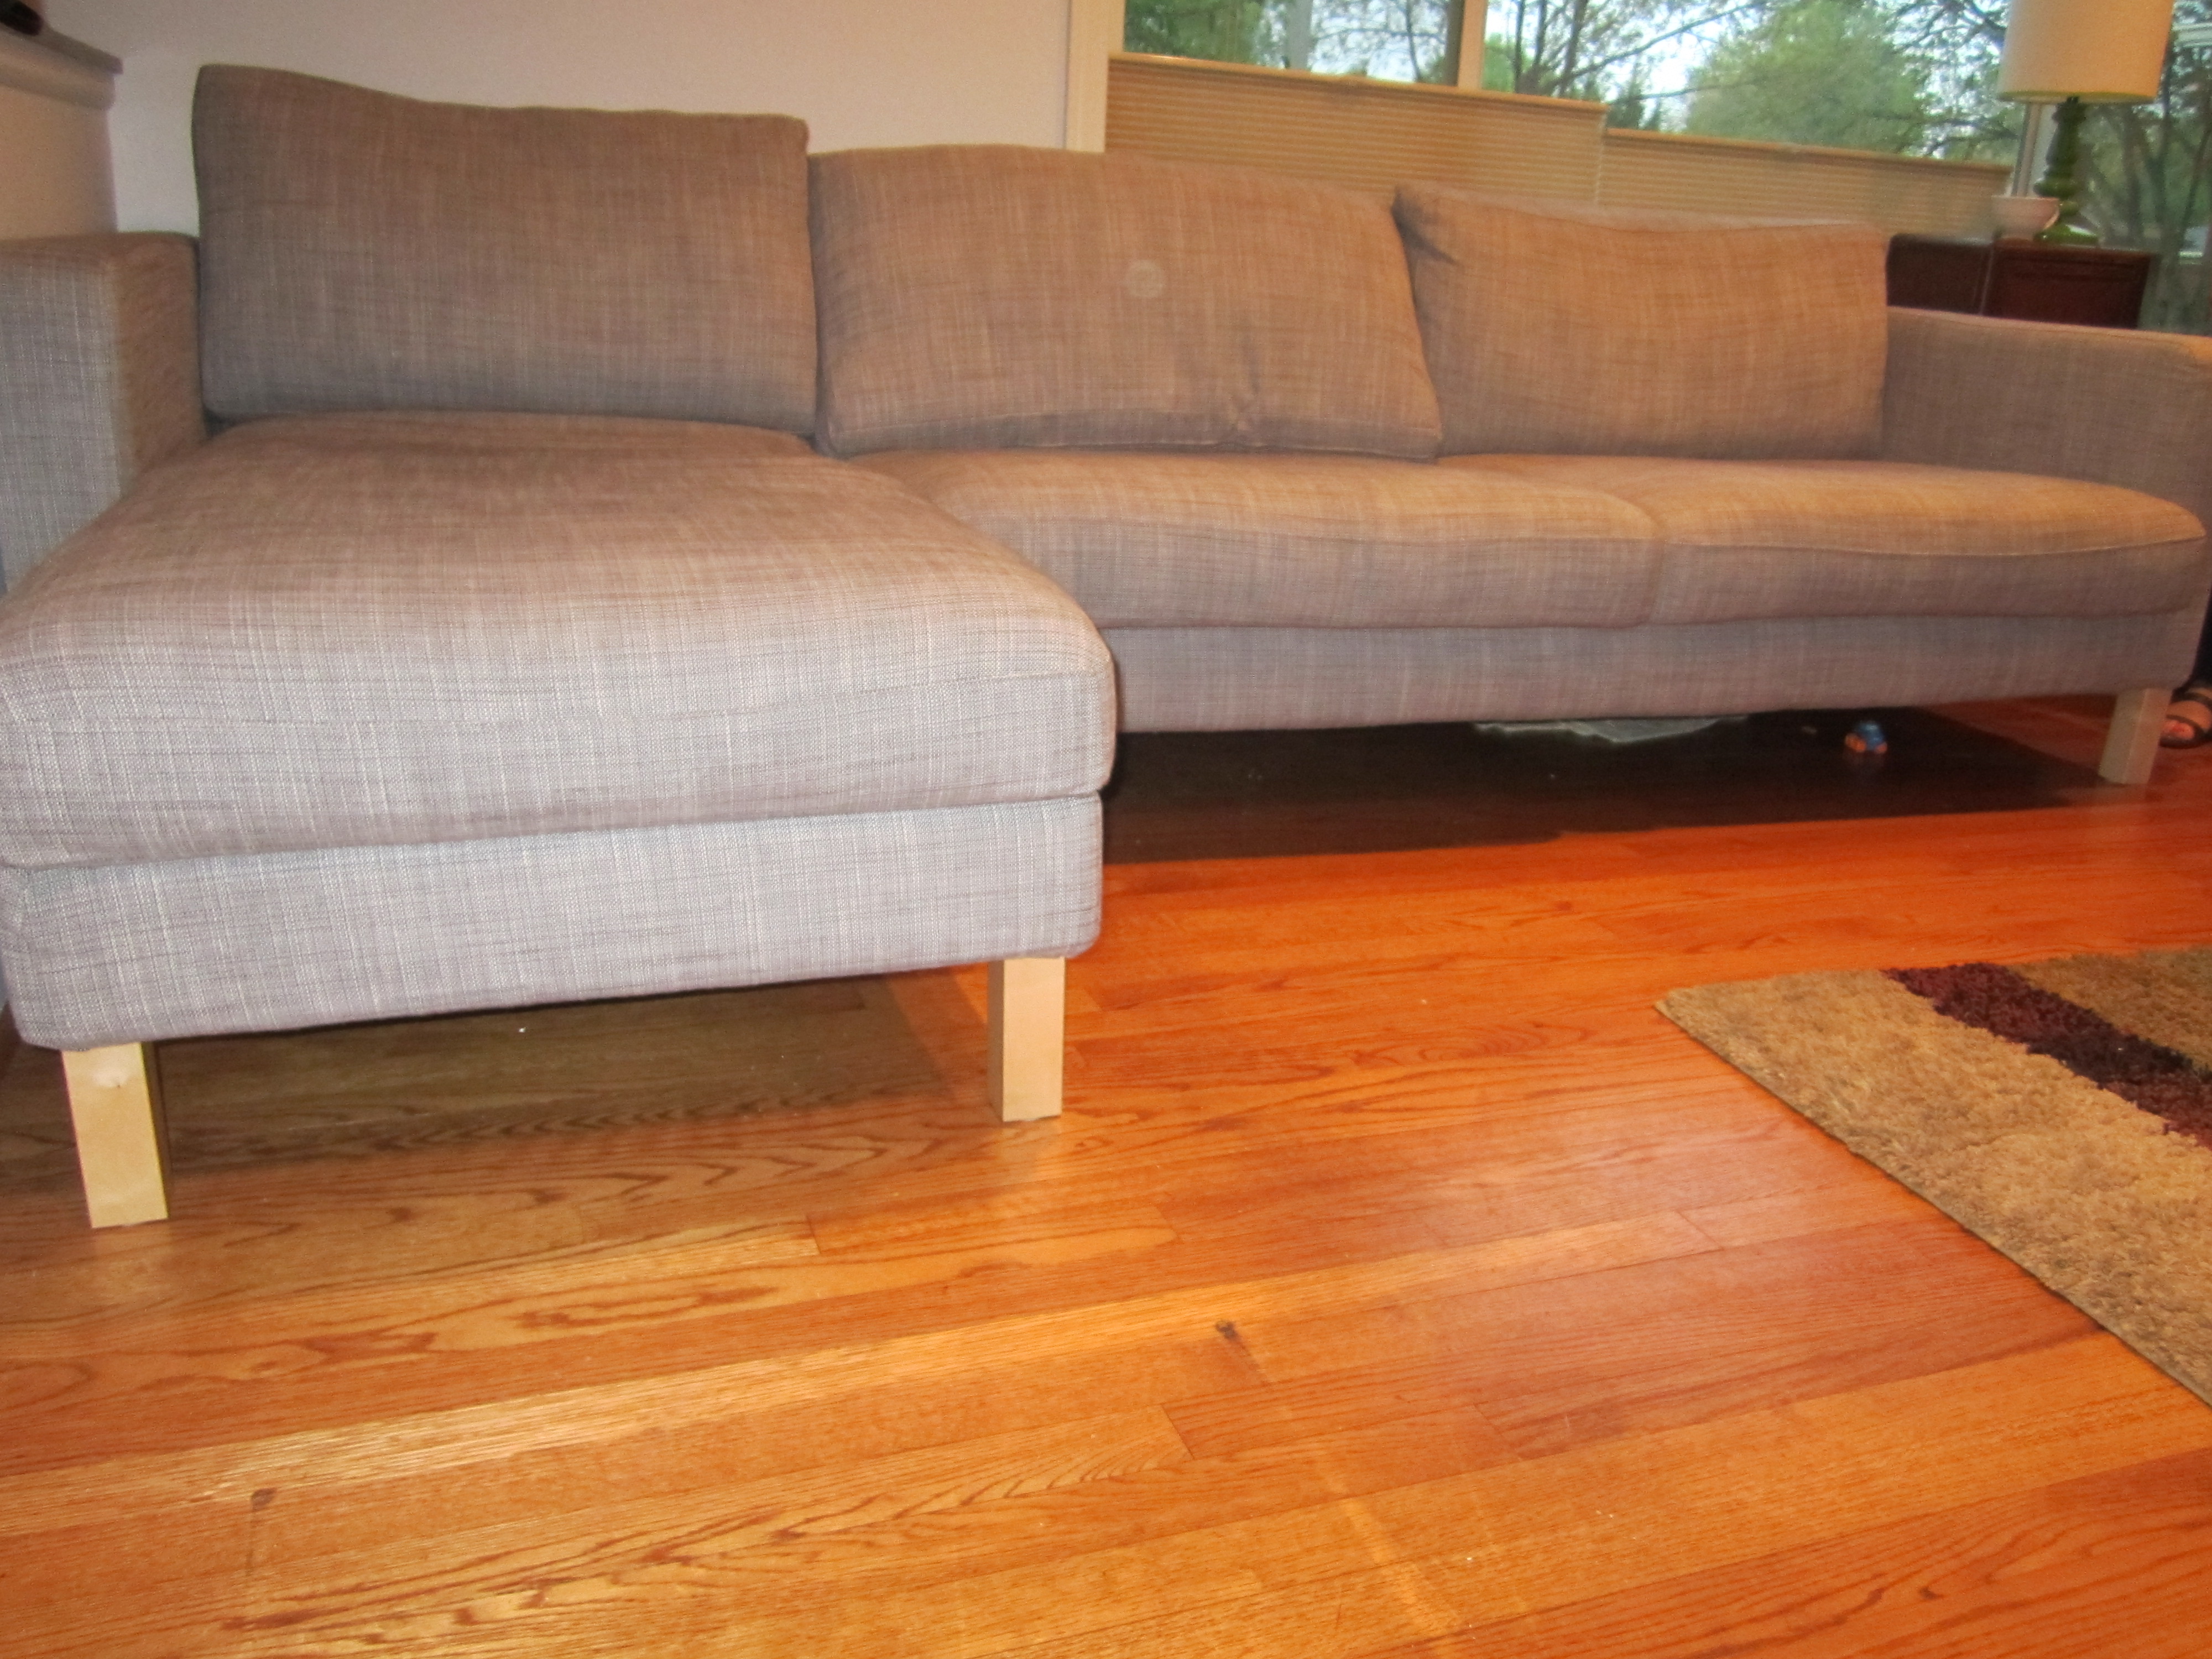 Ikea Karlstad Couch Hack My Mid Century Modest Ranch Make Over